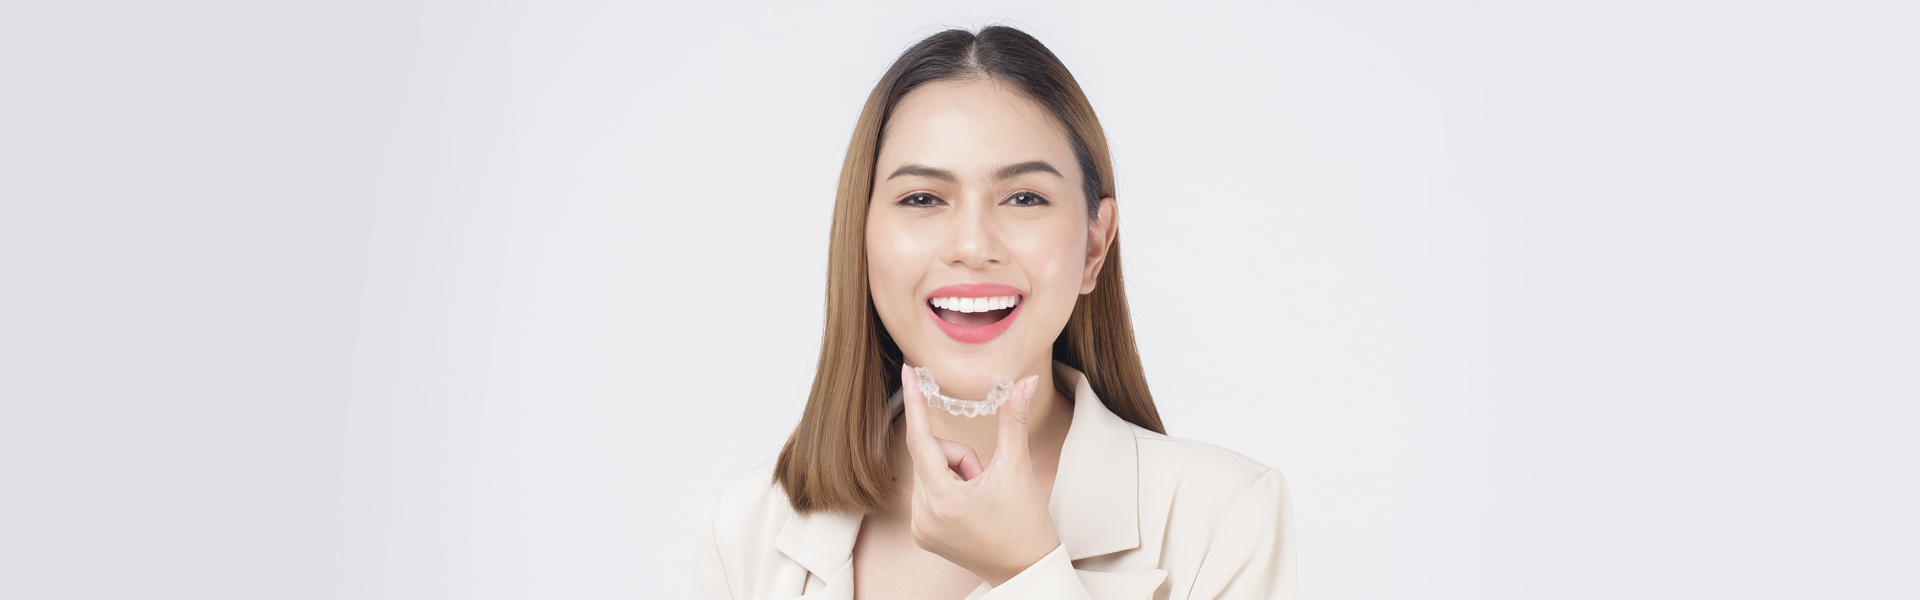 Does Invisalign Change your Face Shape?